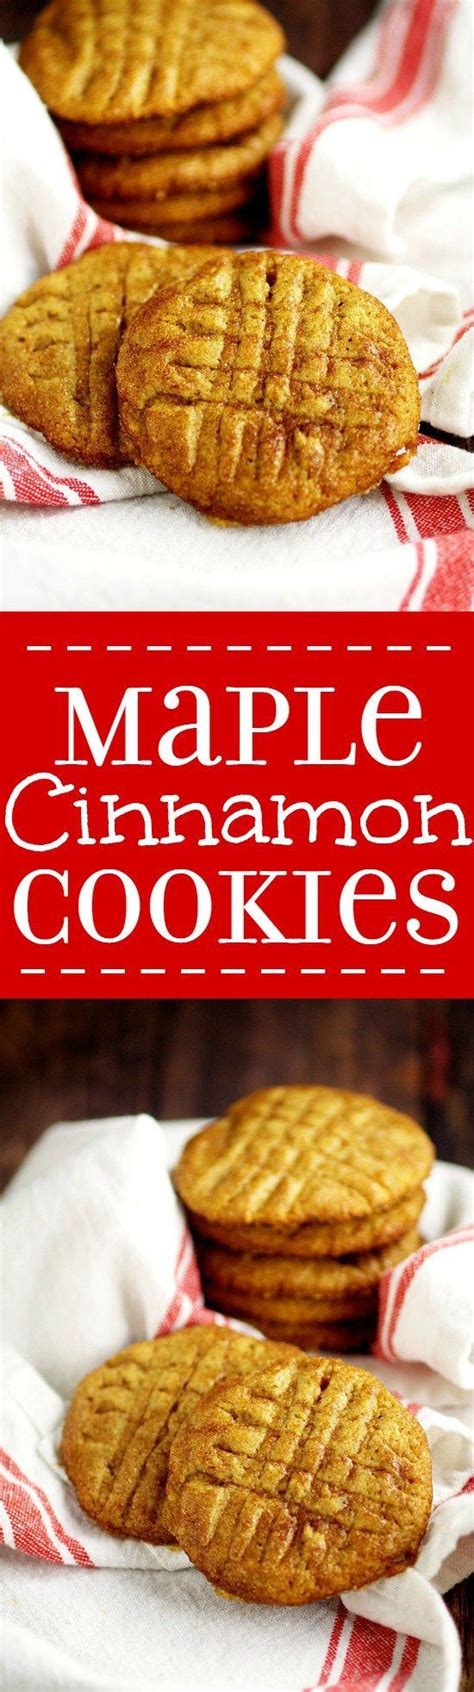 Warm And Cozy These Maple Cinnamon Cookies Recipe Have A Crunchy